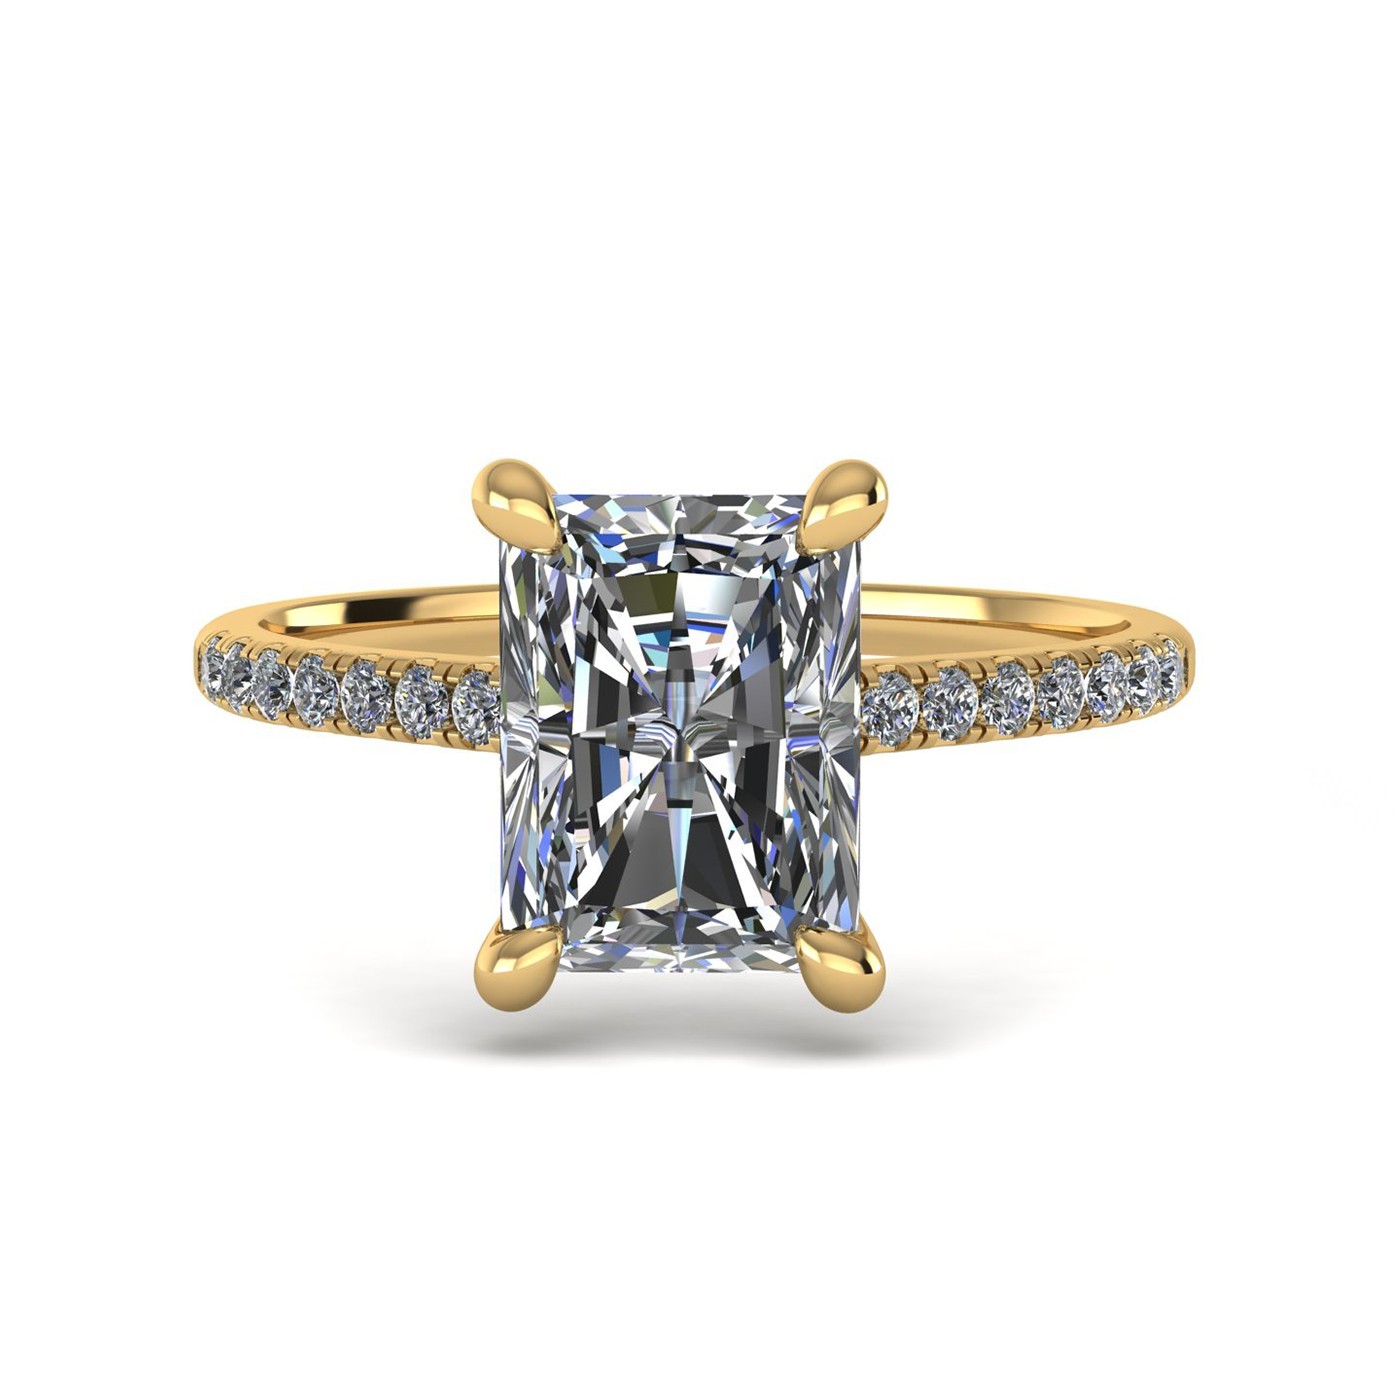 18k yellow gold  2,50 ct 4 prongs radiant cut diamond engagement ring with whisper thin pavÉ set band Photos & images